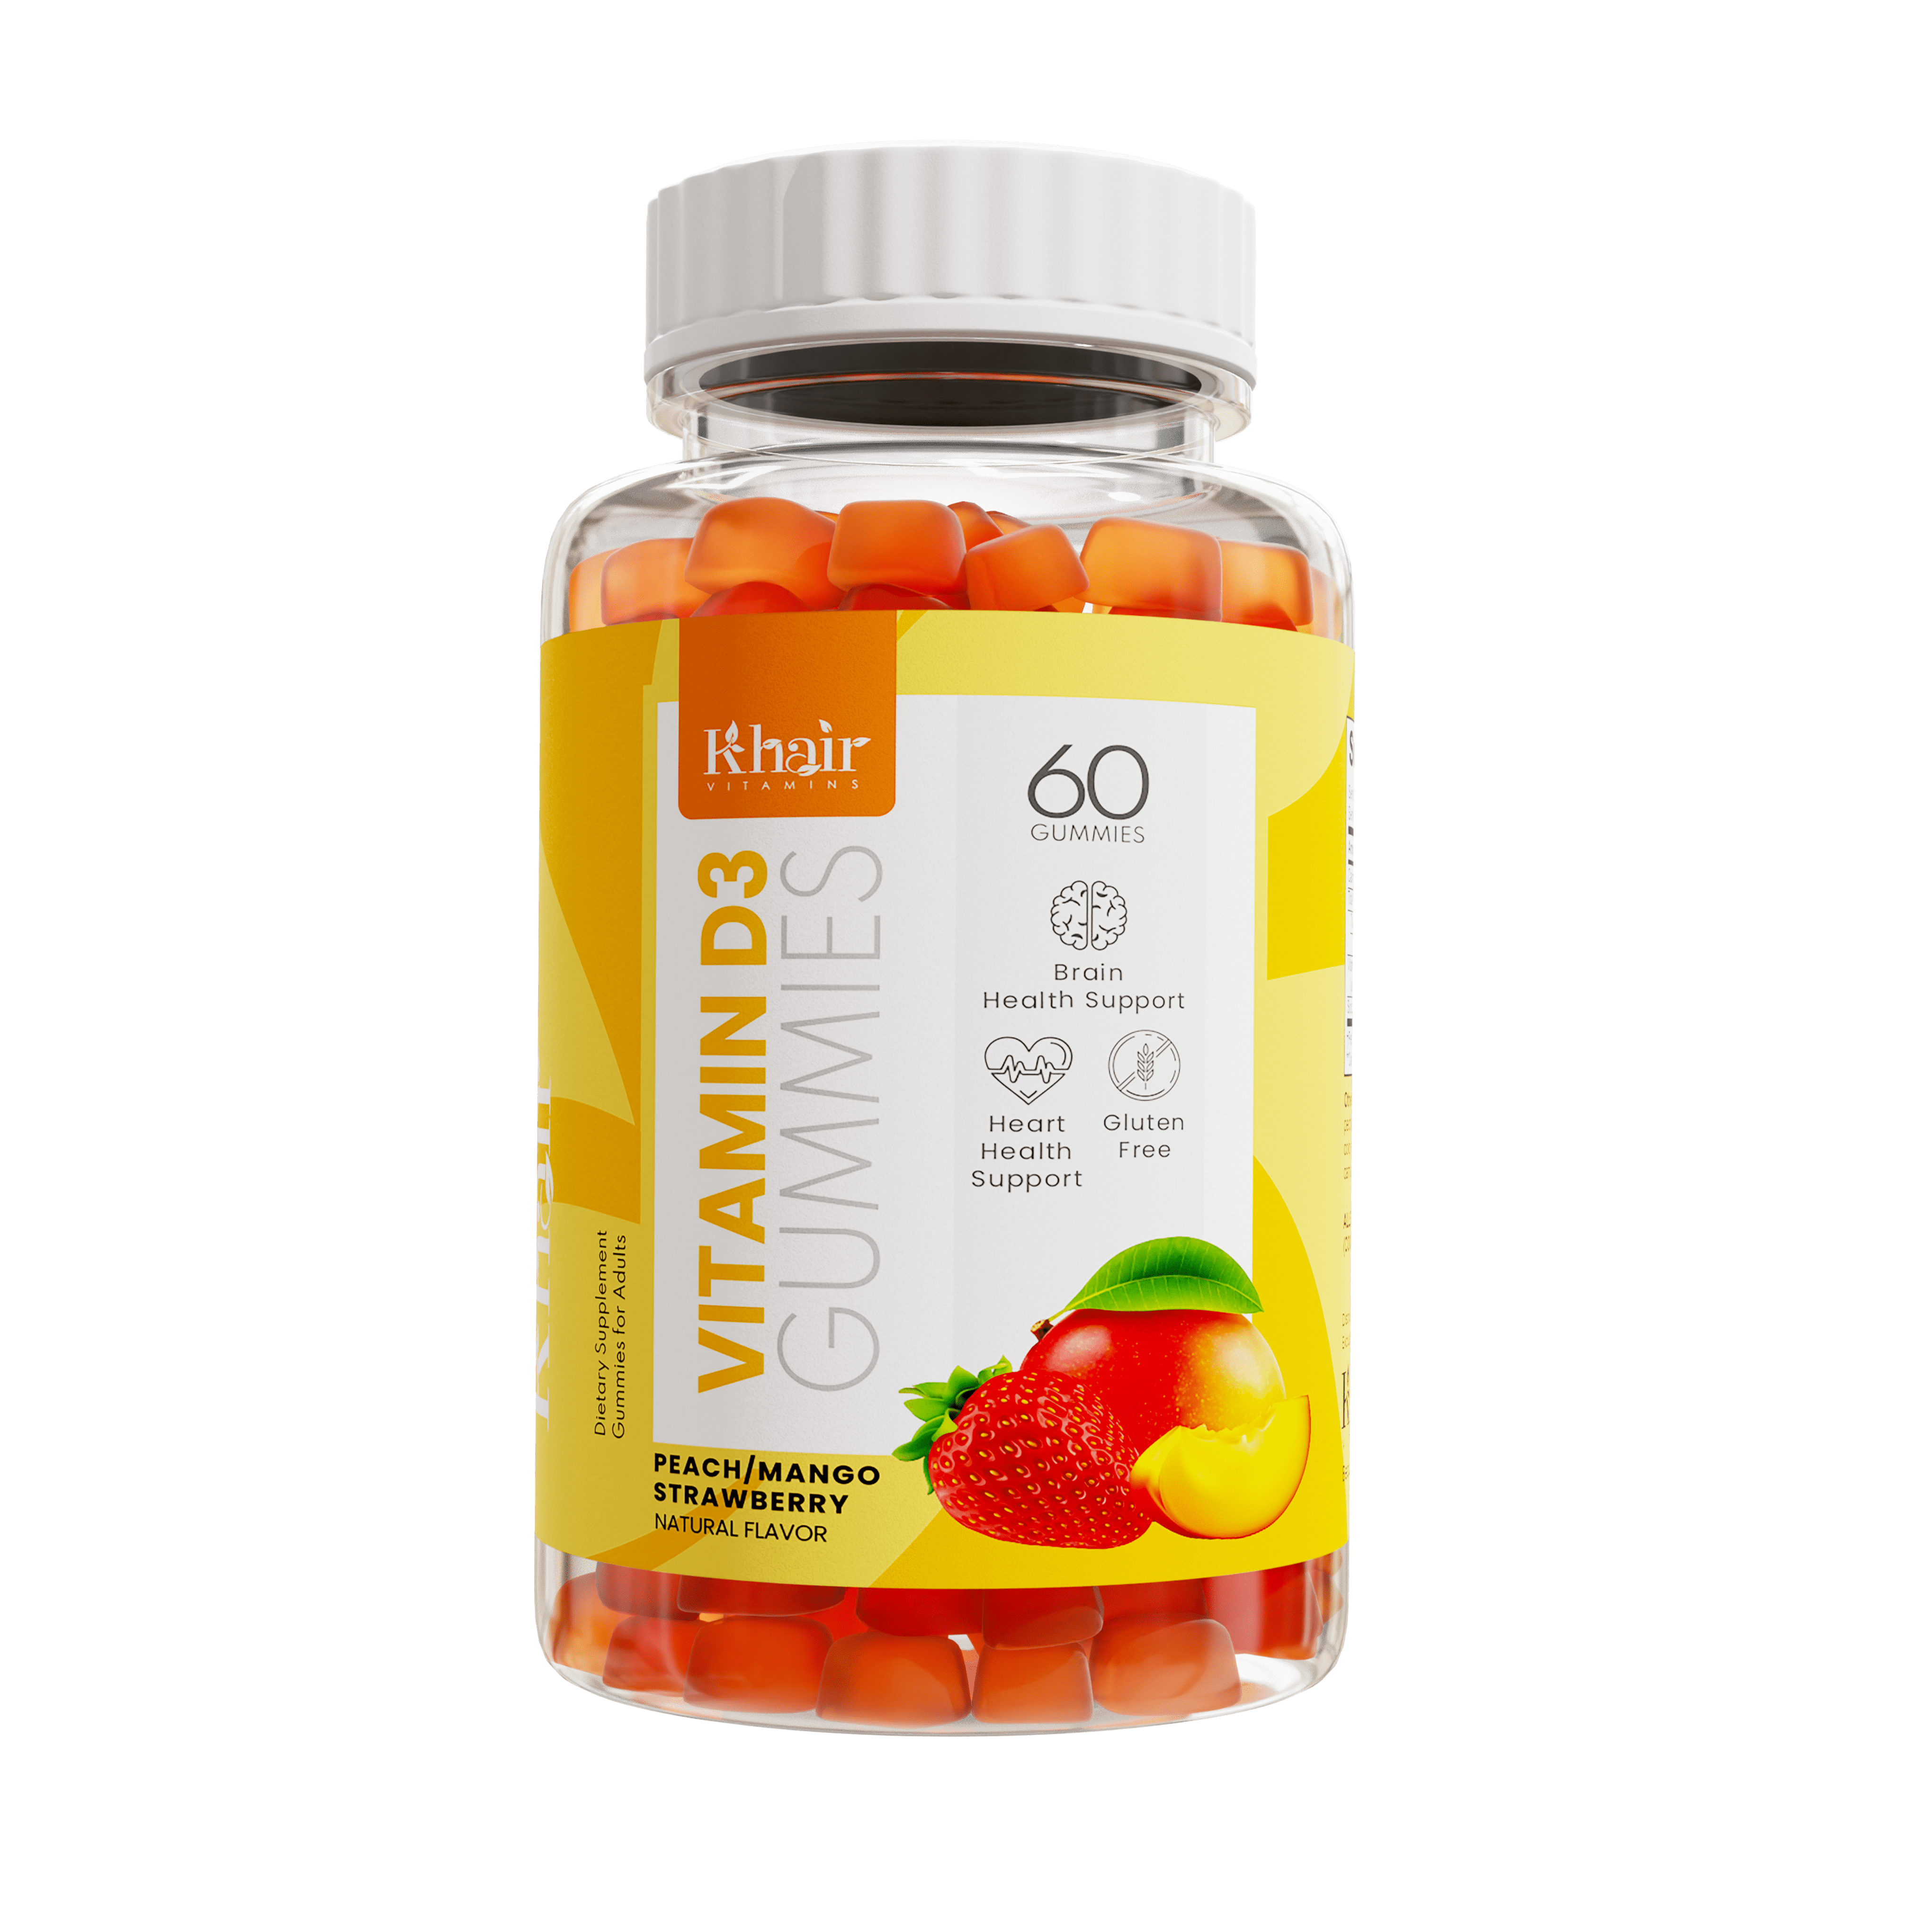 A bottle of Khair Vitamin D3 Gummies with a yellow label, containing 60 gummies that support brain and heart health, marked as gluten-free, in peach, mango, and strawberry flavors.